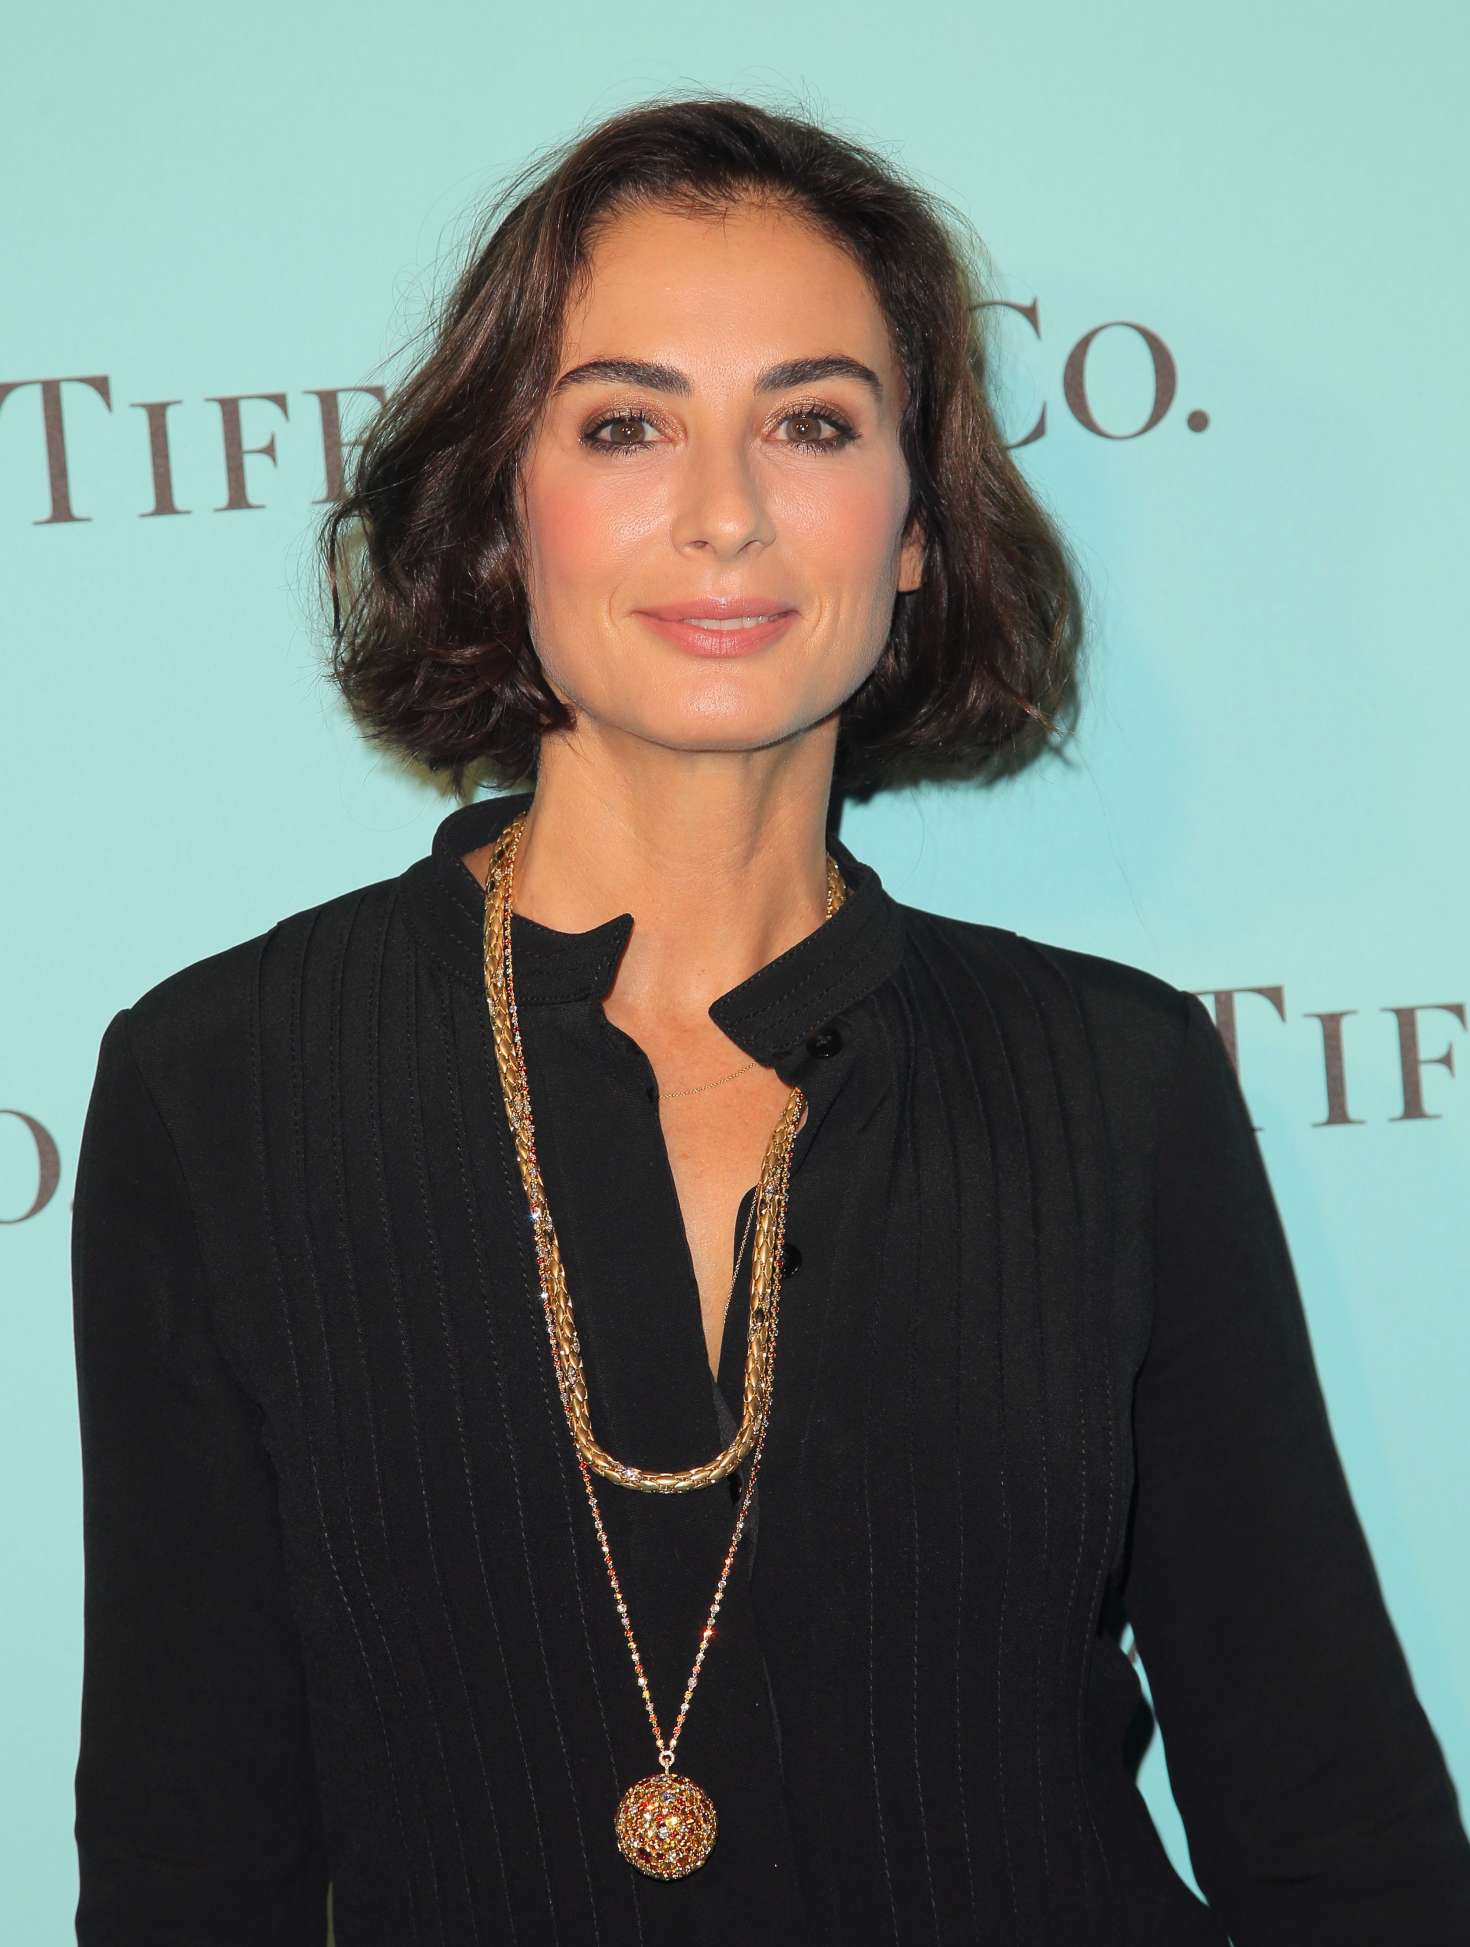 Francesca Amfitheatrof attends the Sarabande Foundation Fundraiser at  News Photo - Getty Images